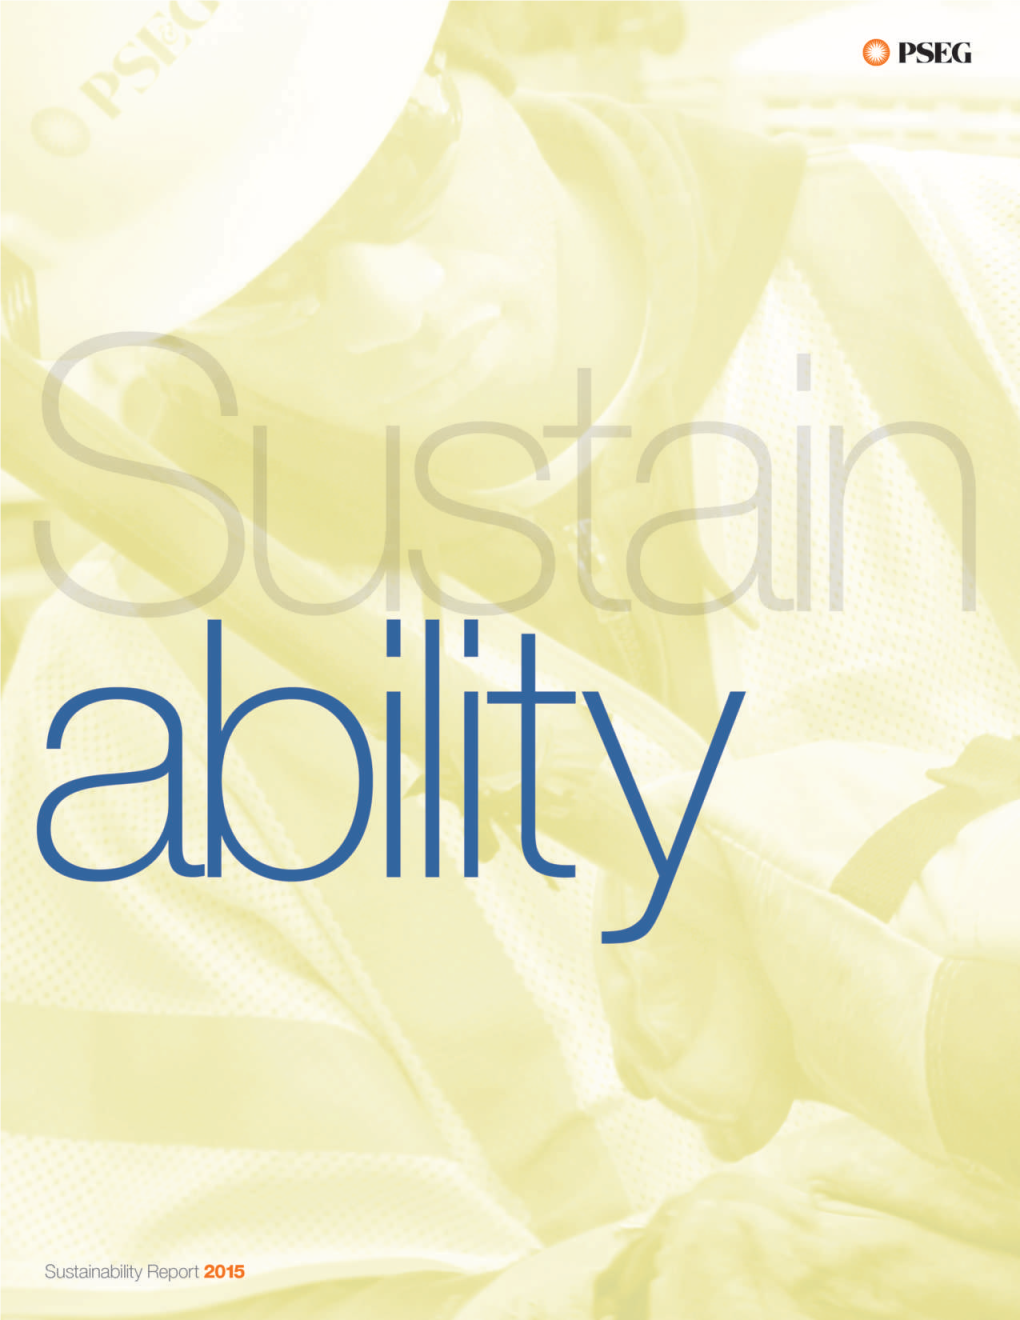 Sustainability Report That Updates Our Progress Company of Toward This Goal in the Previous Year